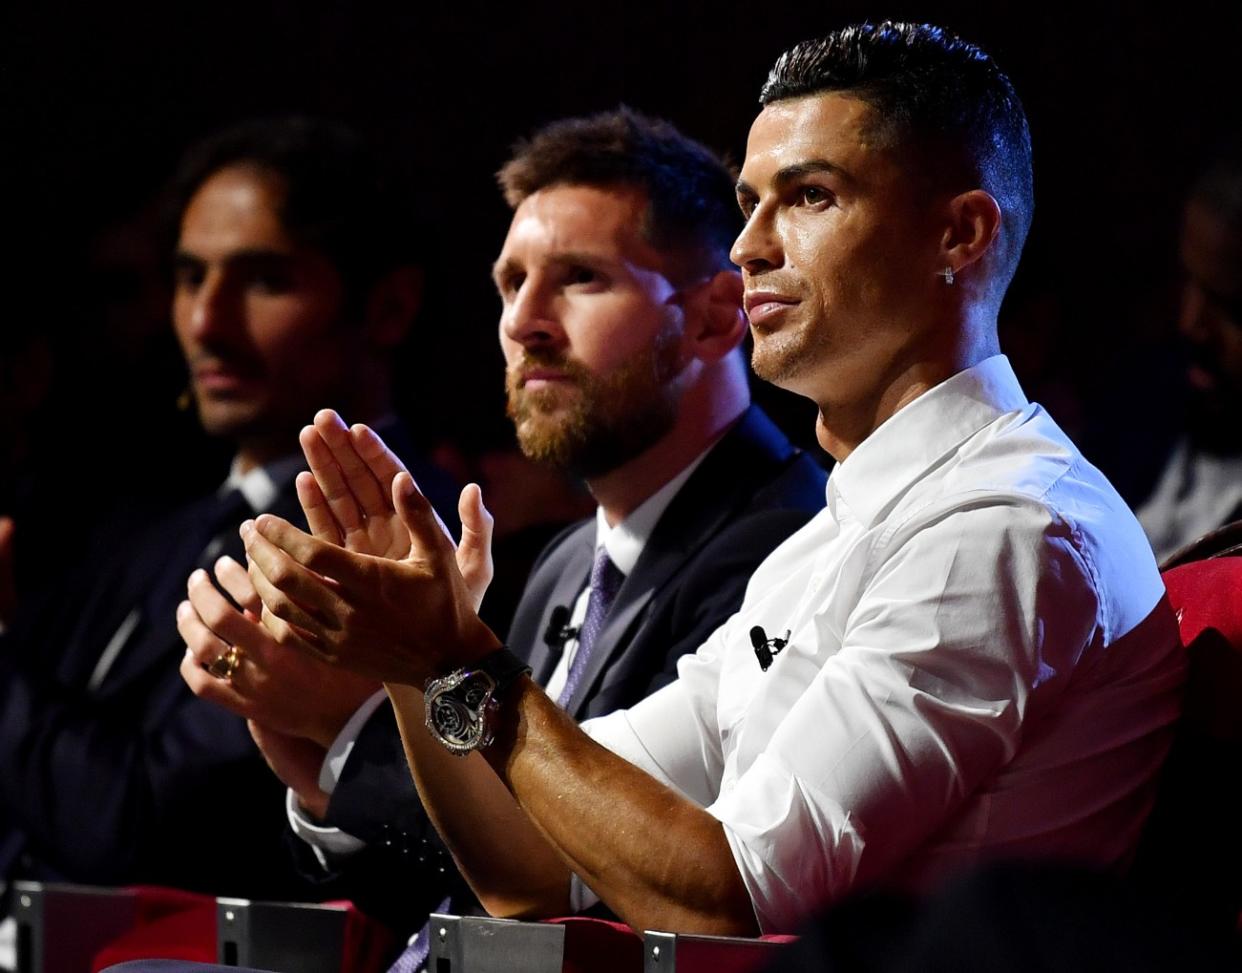 Cristiano Ronaldo and Lionel Messi didn't have much reason to smile after the Champions League group stage draw. (Getty)